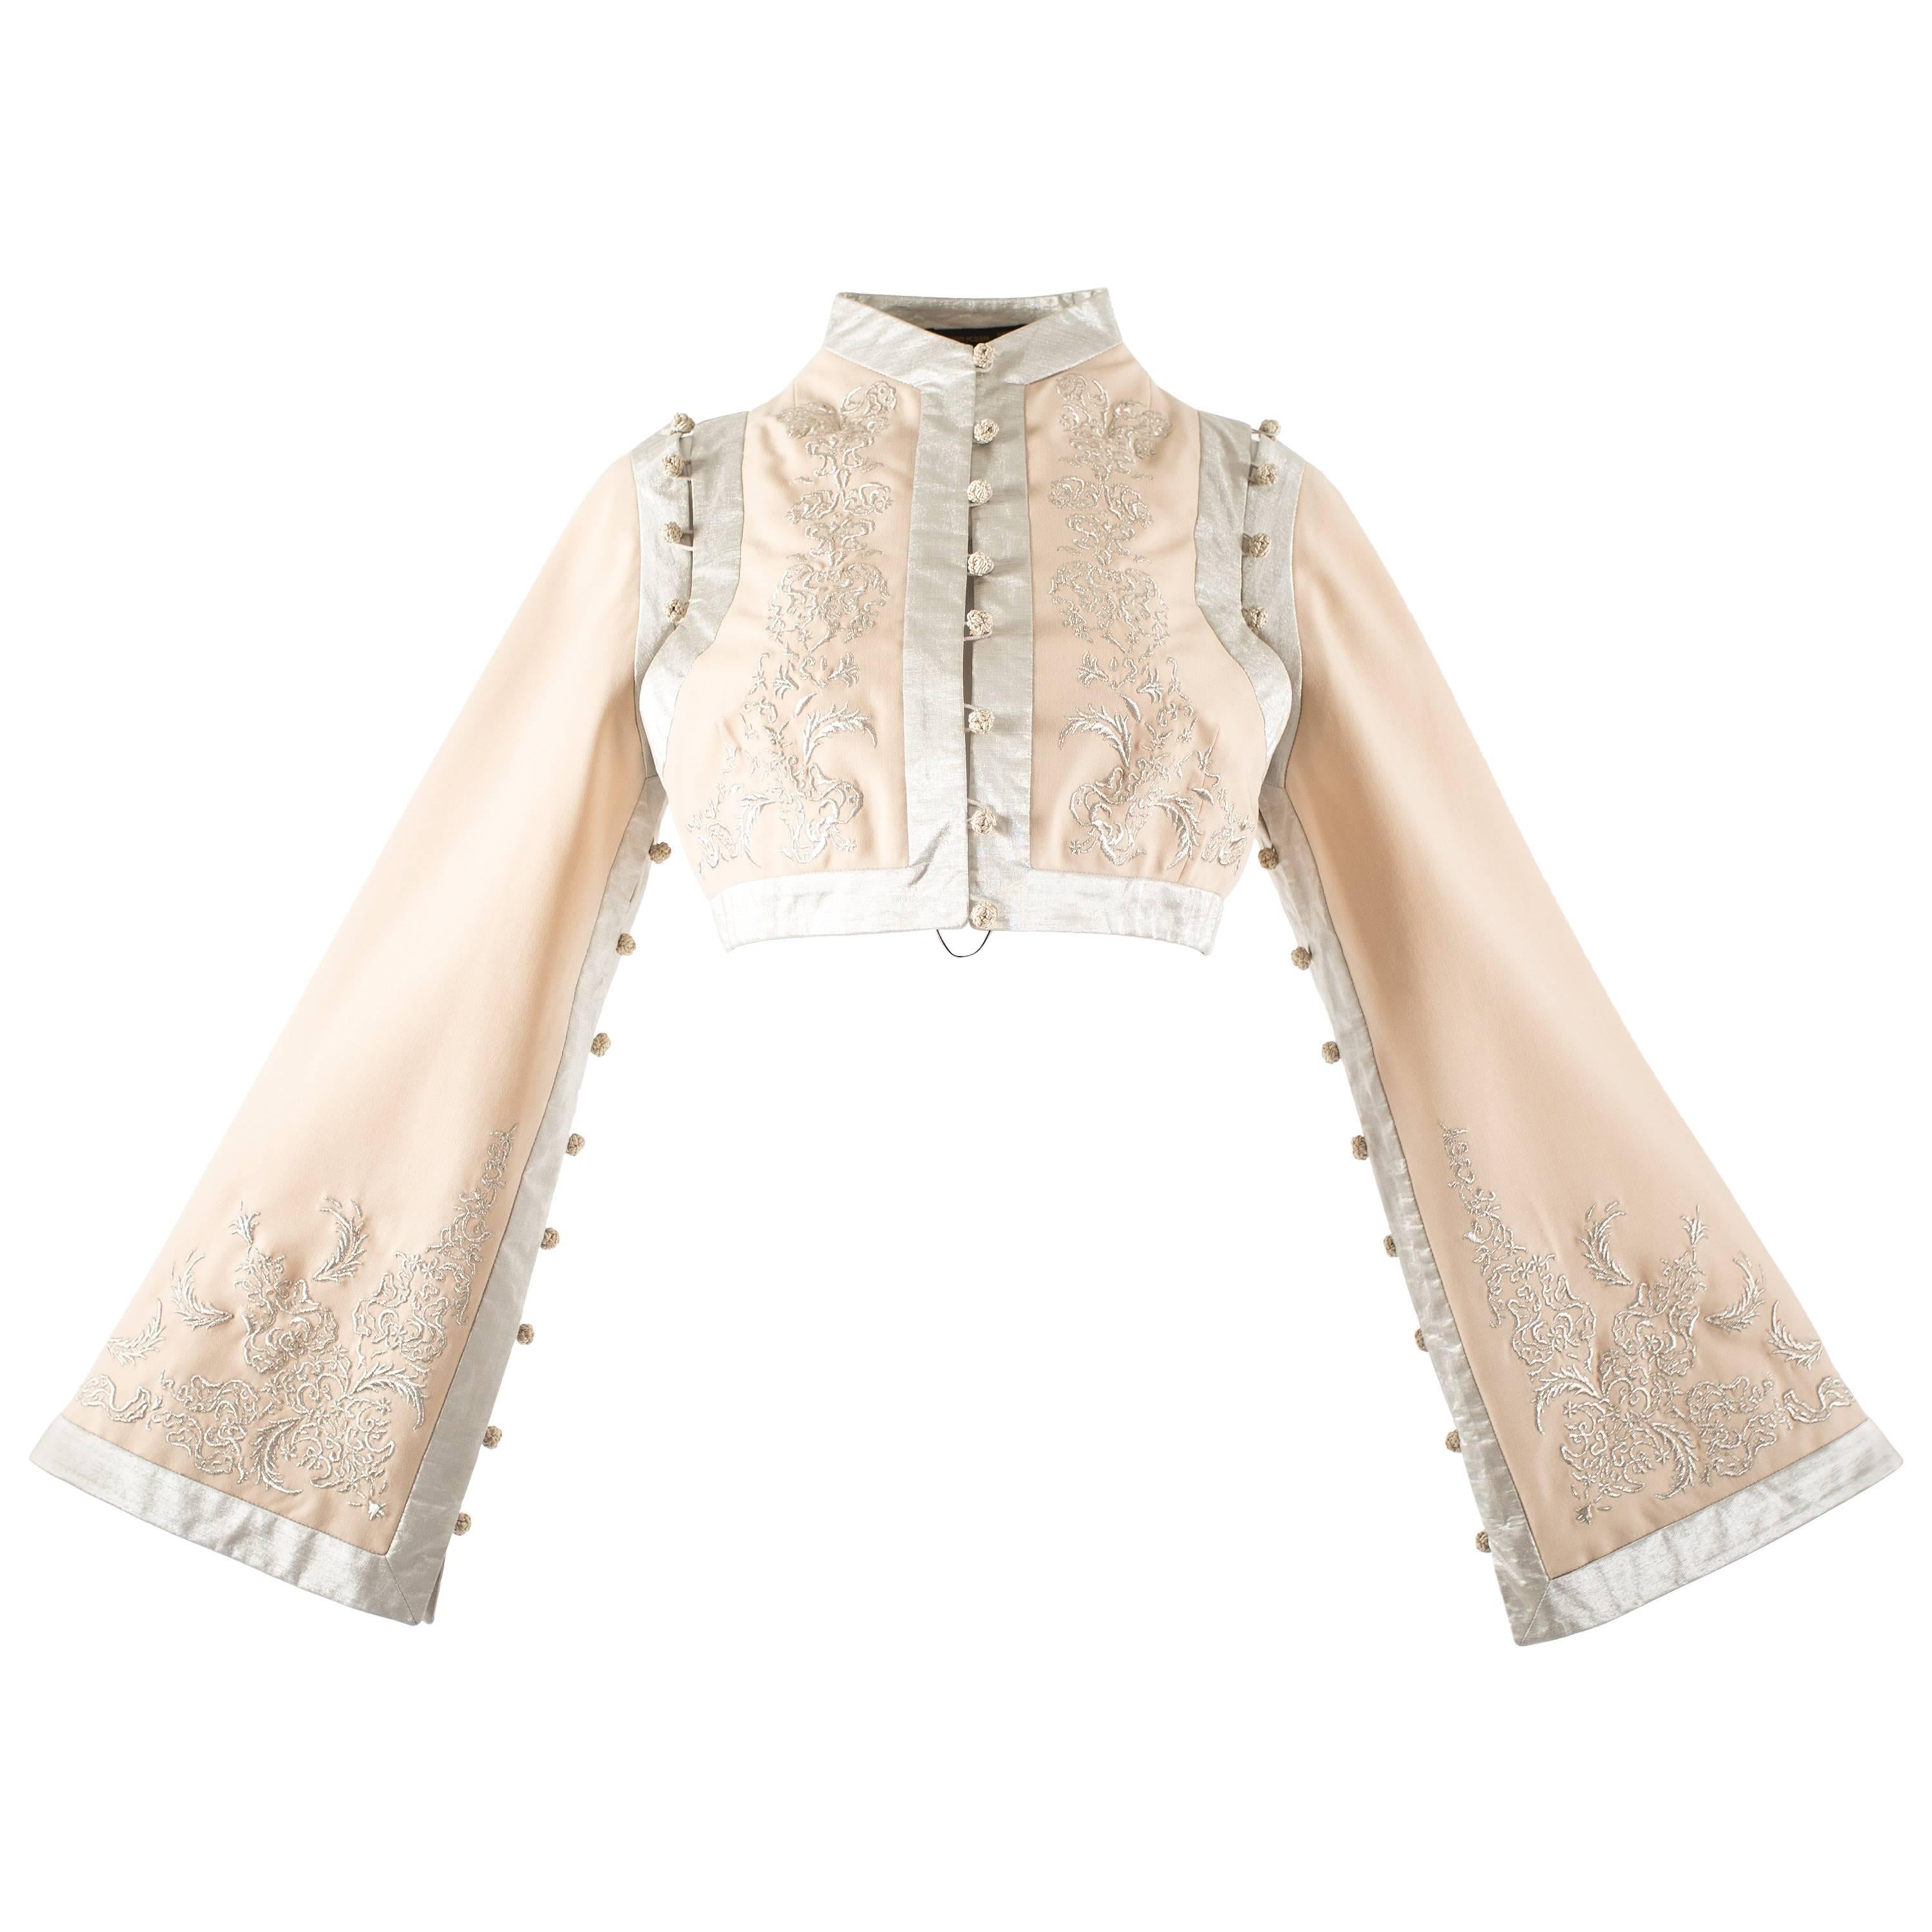 Alexander McQueen embroidered ivory silk cropped evening jacket , ss 2000